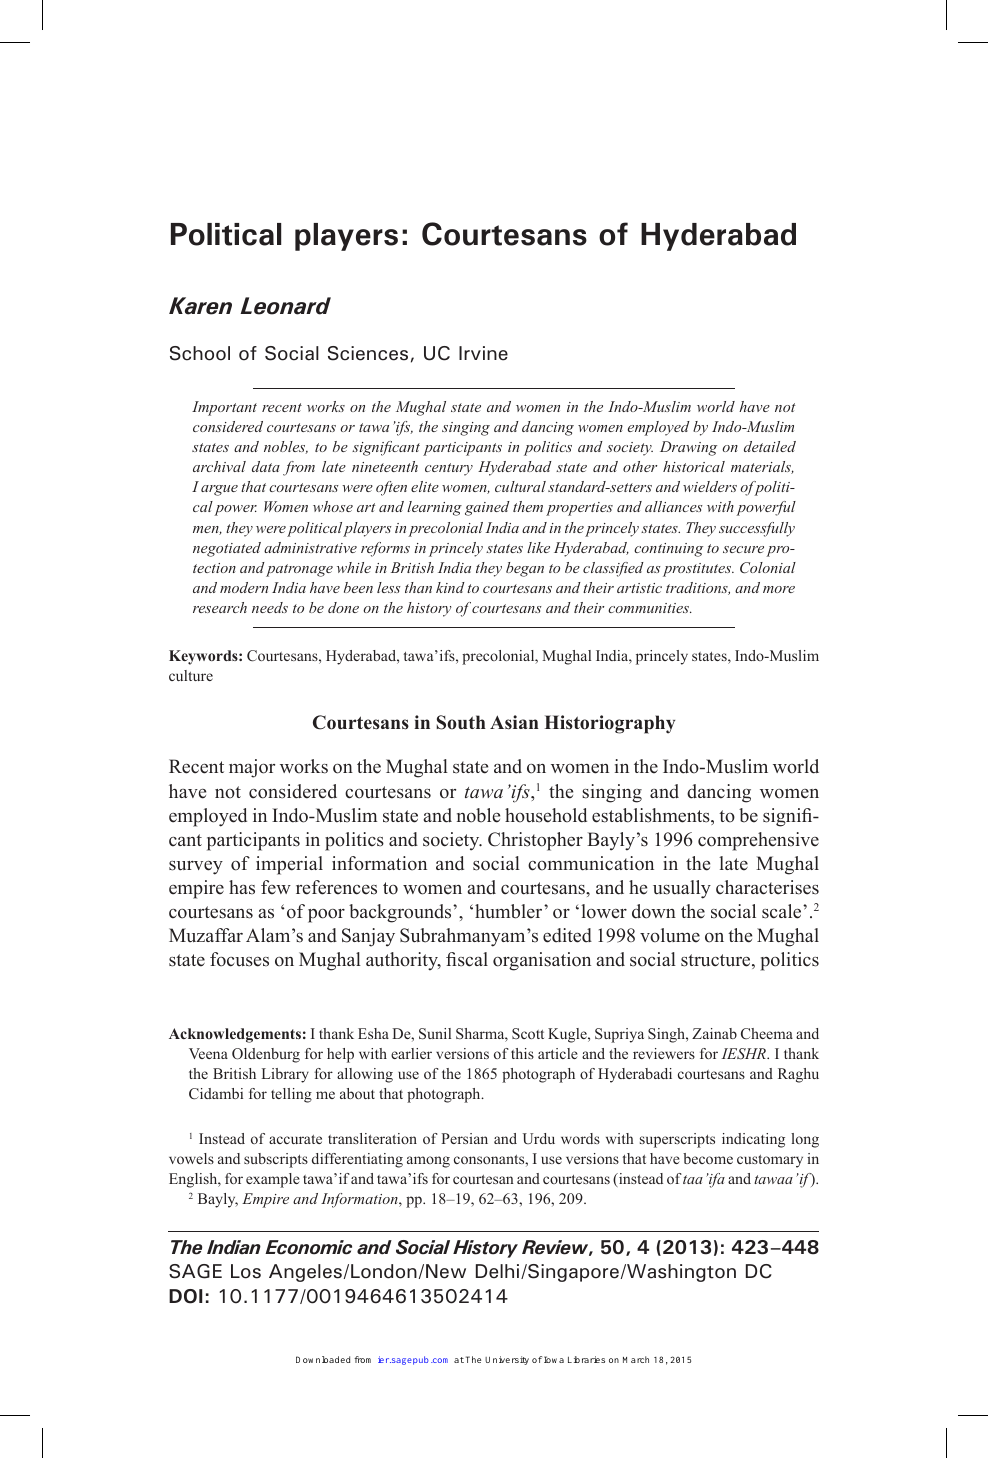 Political Players Courtesans Of Hyderabad Topic Of Research Paper In Law Download Scholarly Article Pdf And Read For Free On Cyberleninka Open Science Hub